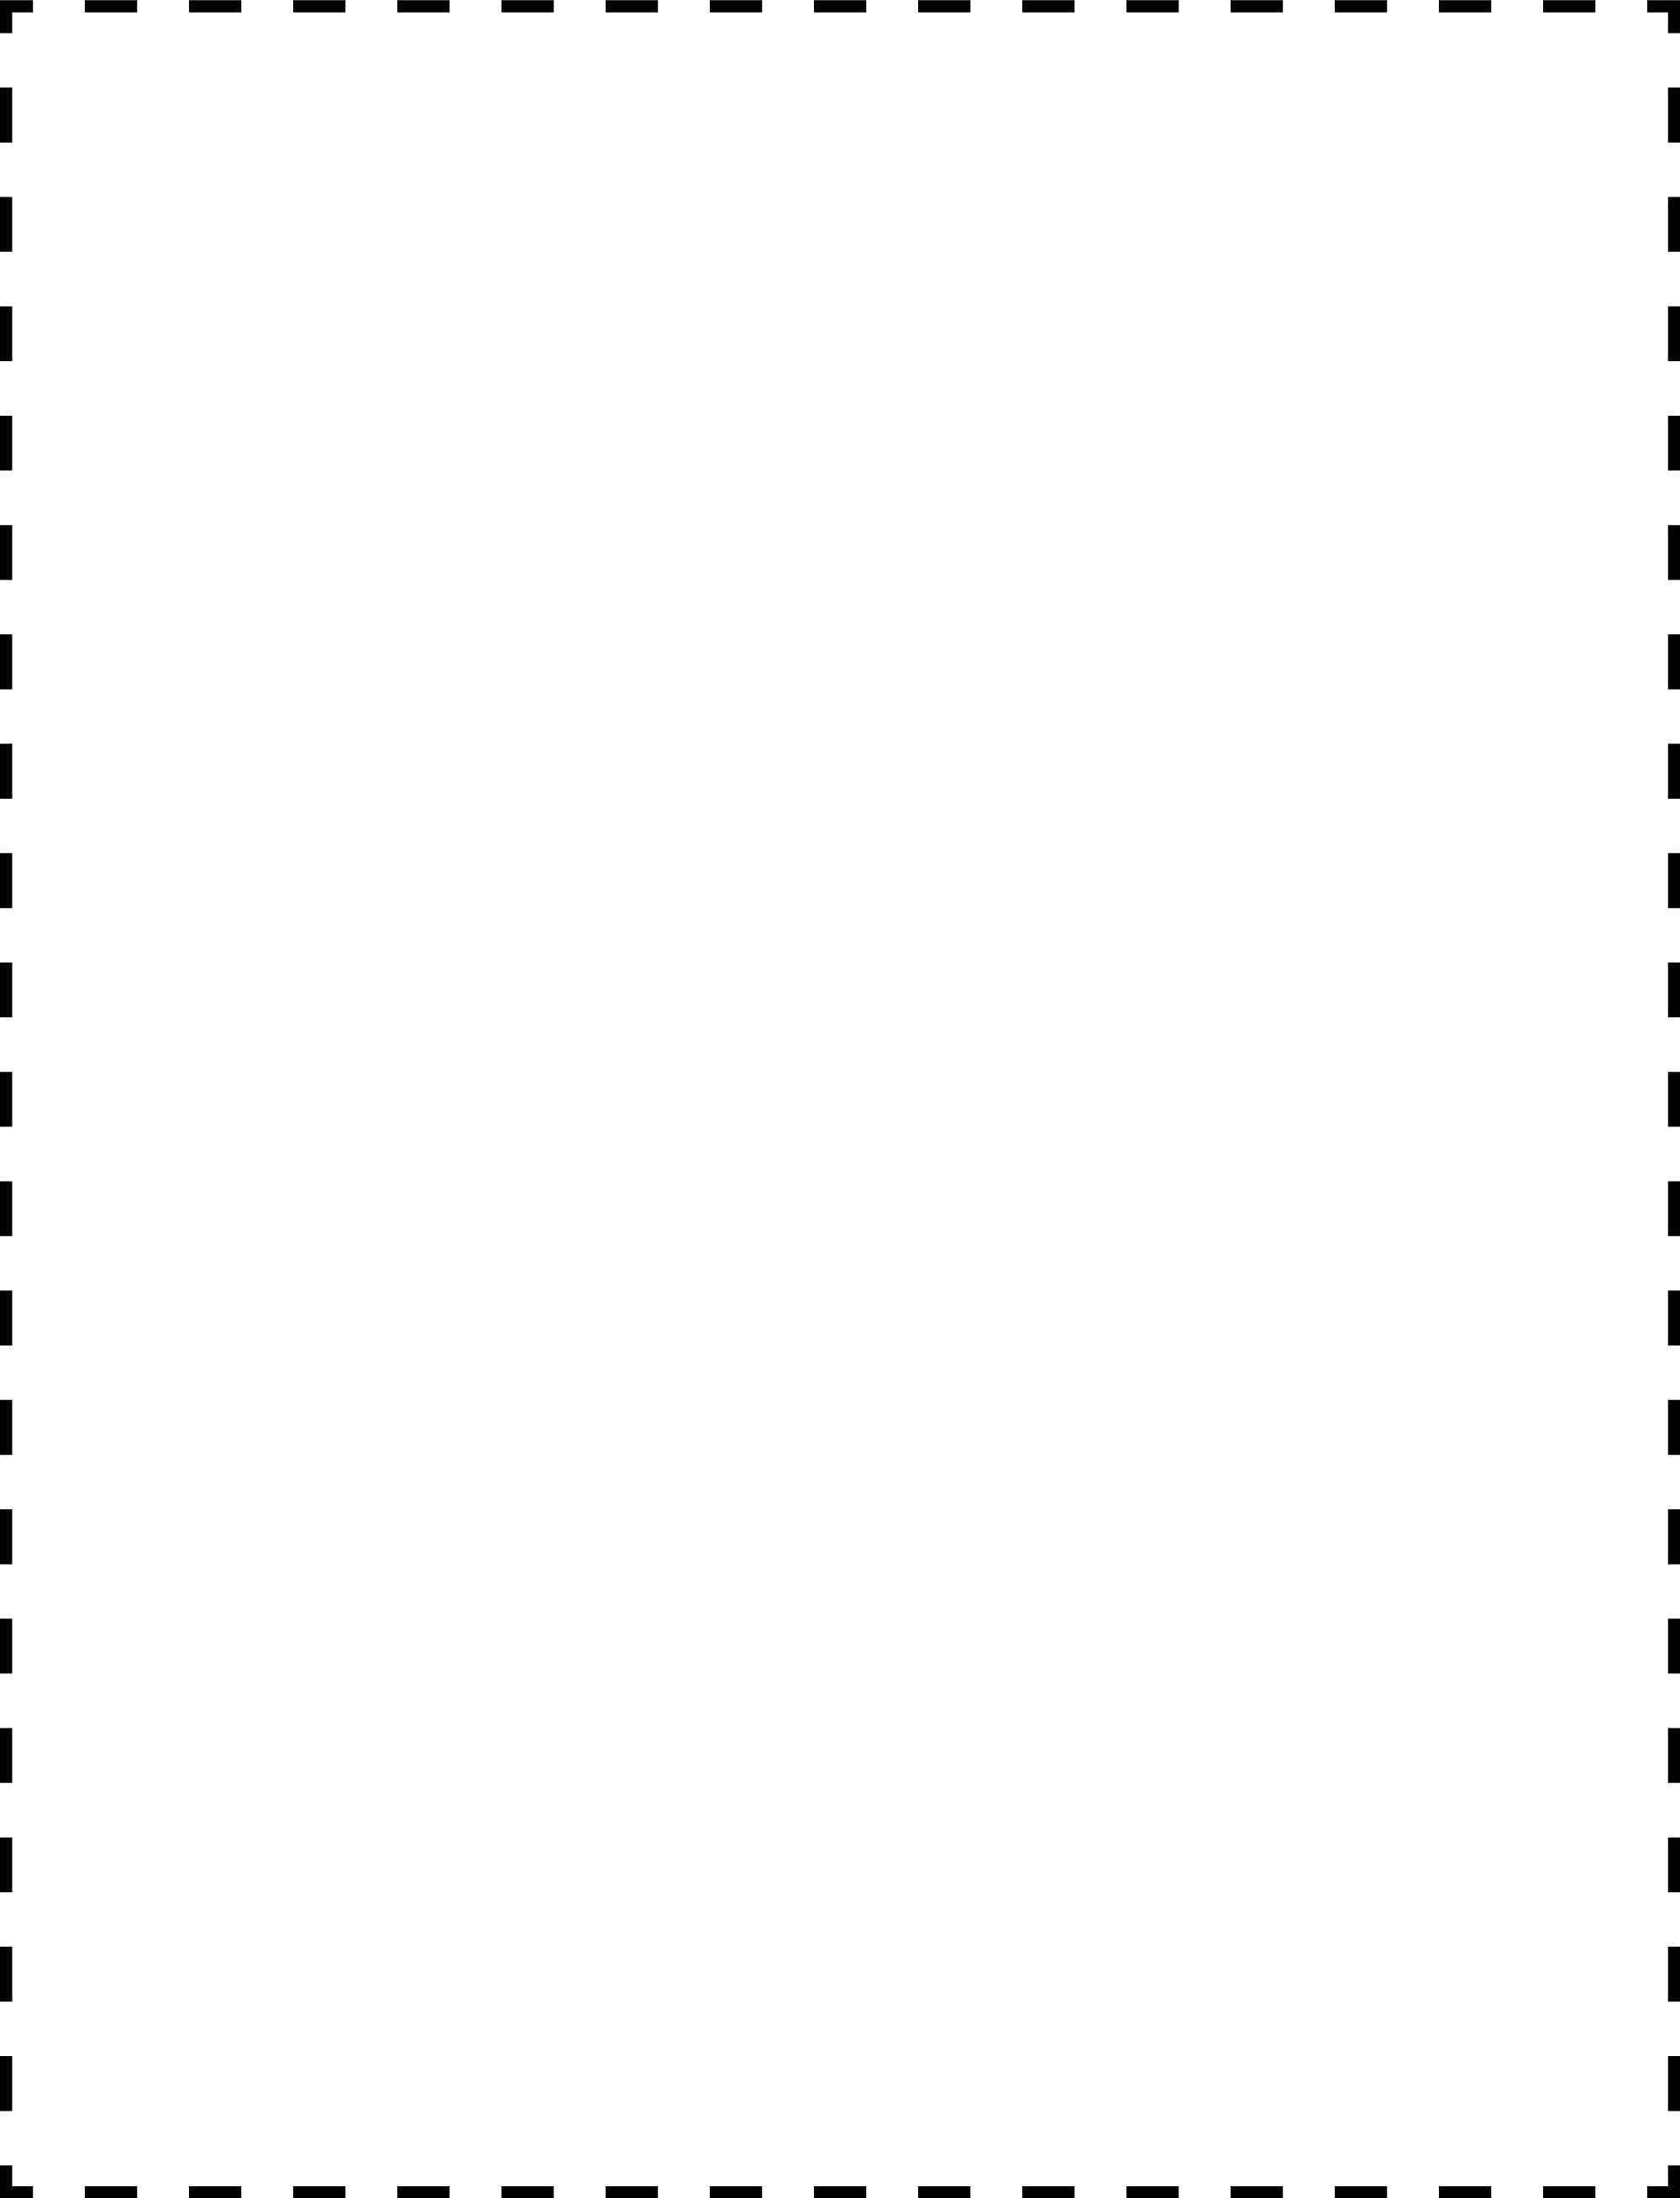 2701-coupon-outline-4x5-k.png